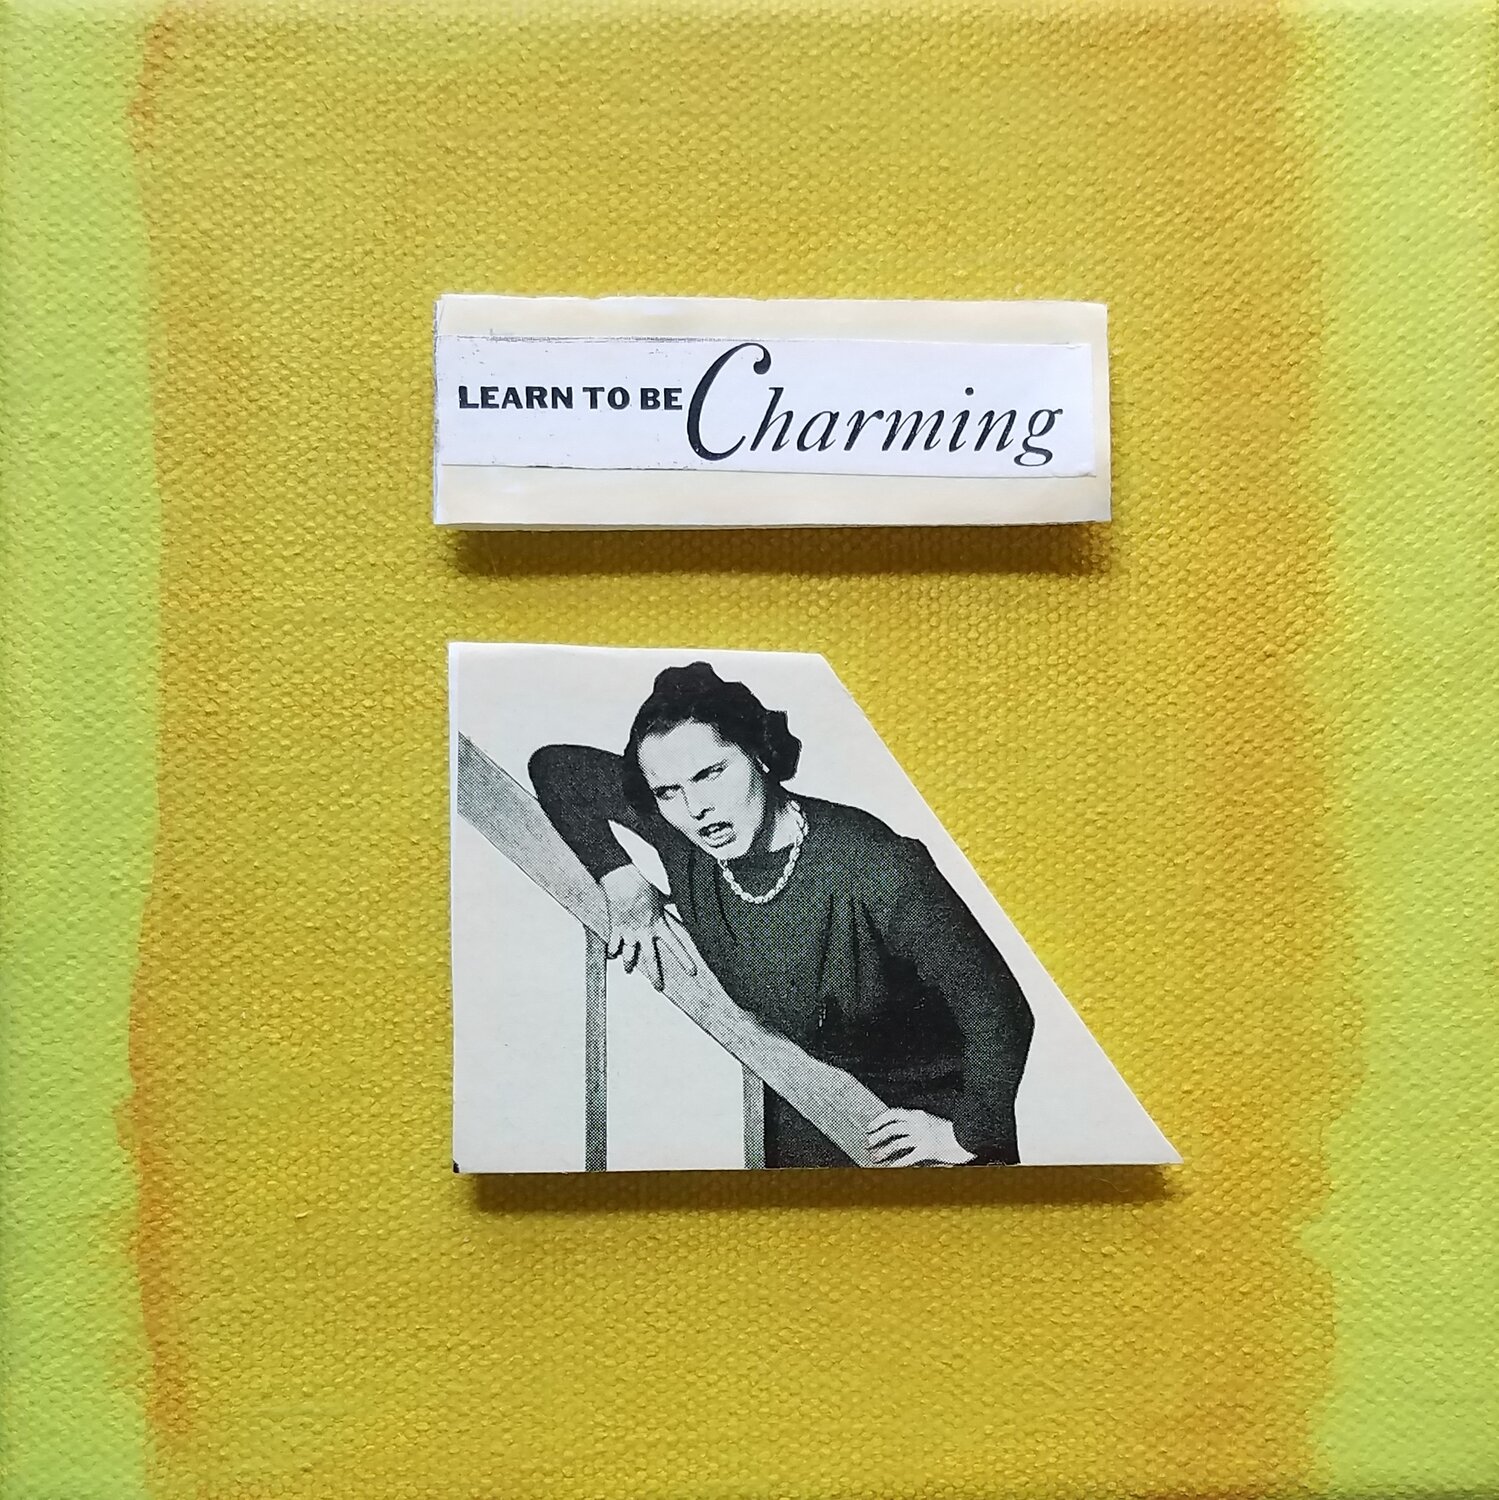 "Learn to be Charming" by Barbara Winfield